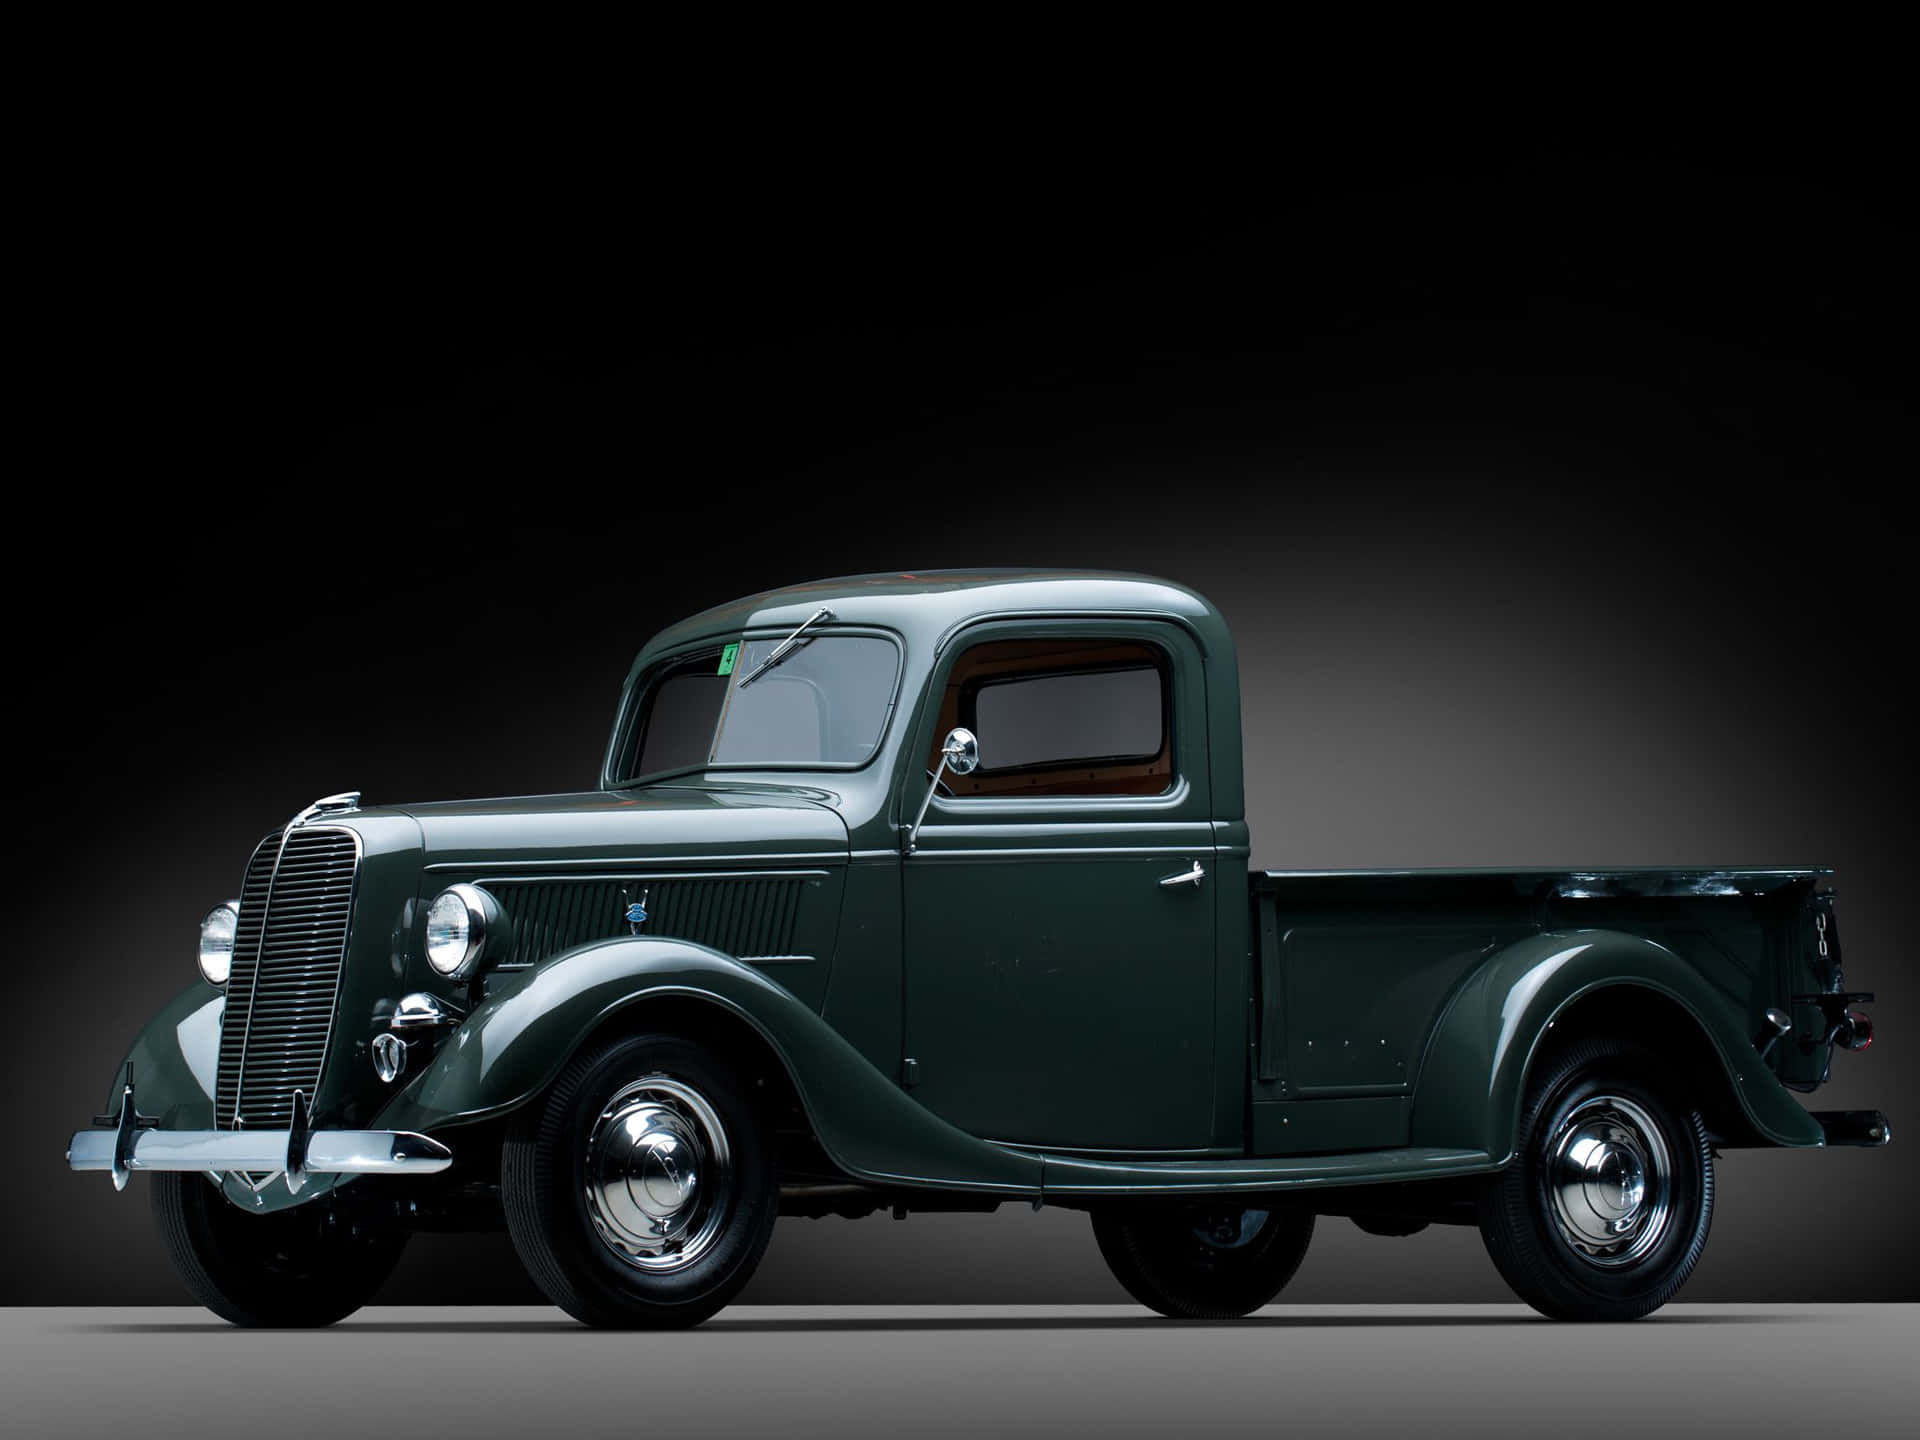 The Classic American Ford Pickup Truck Background